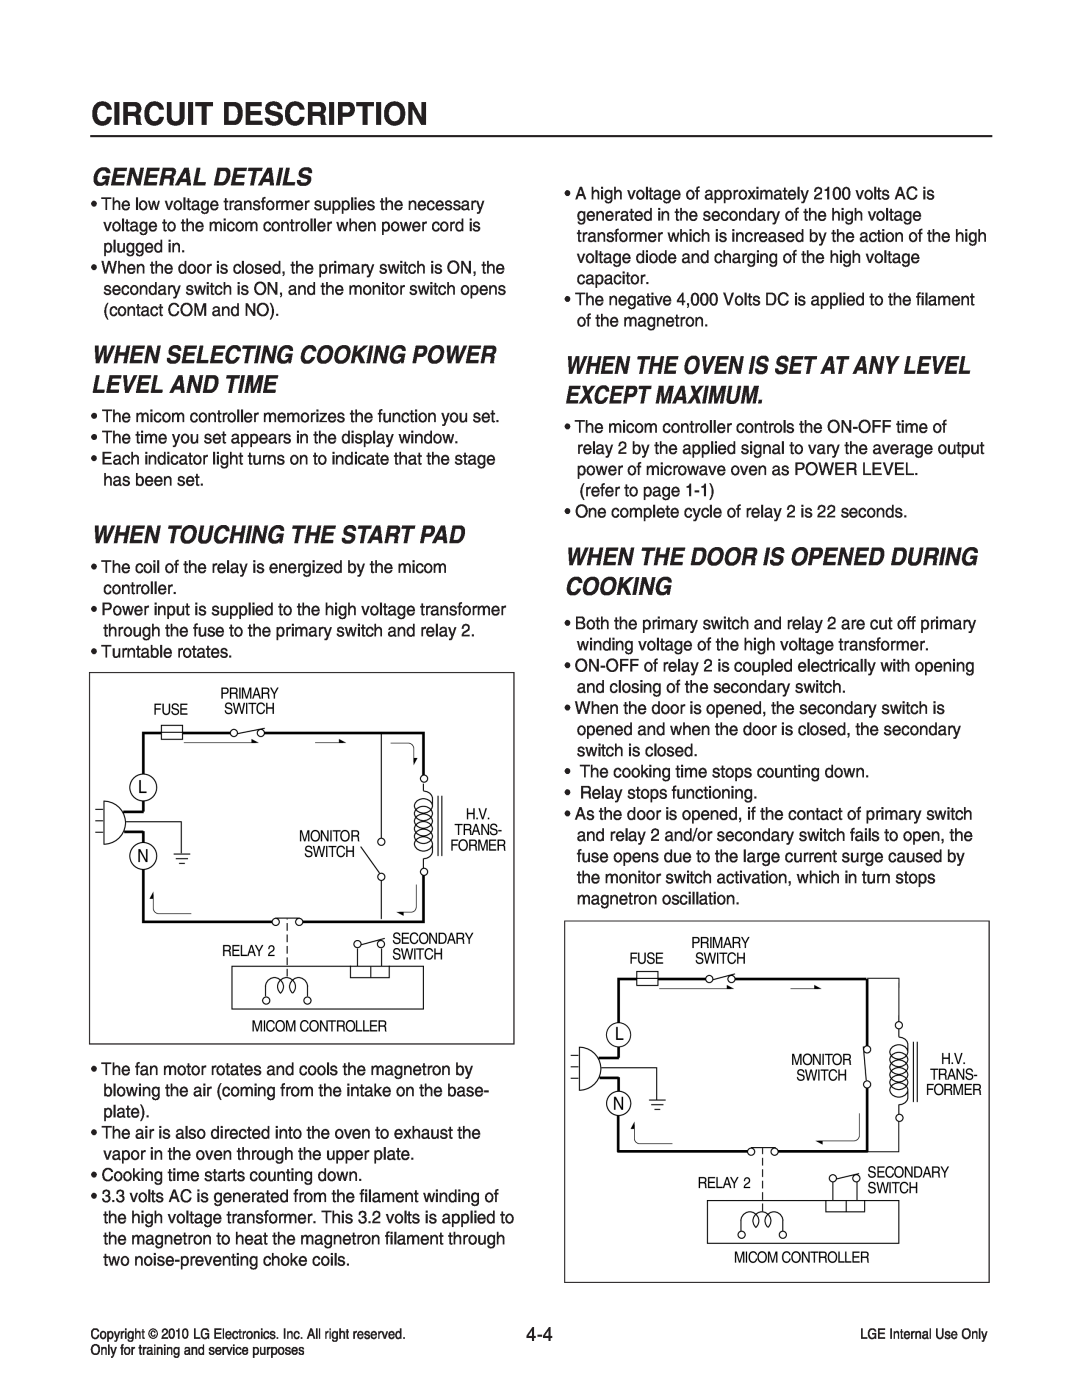 Frigidaire LCRT2010ST service manual Circuit Description, General Details, When Selecting Cooking Power Level And Time 